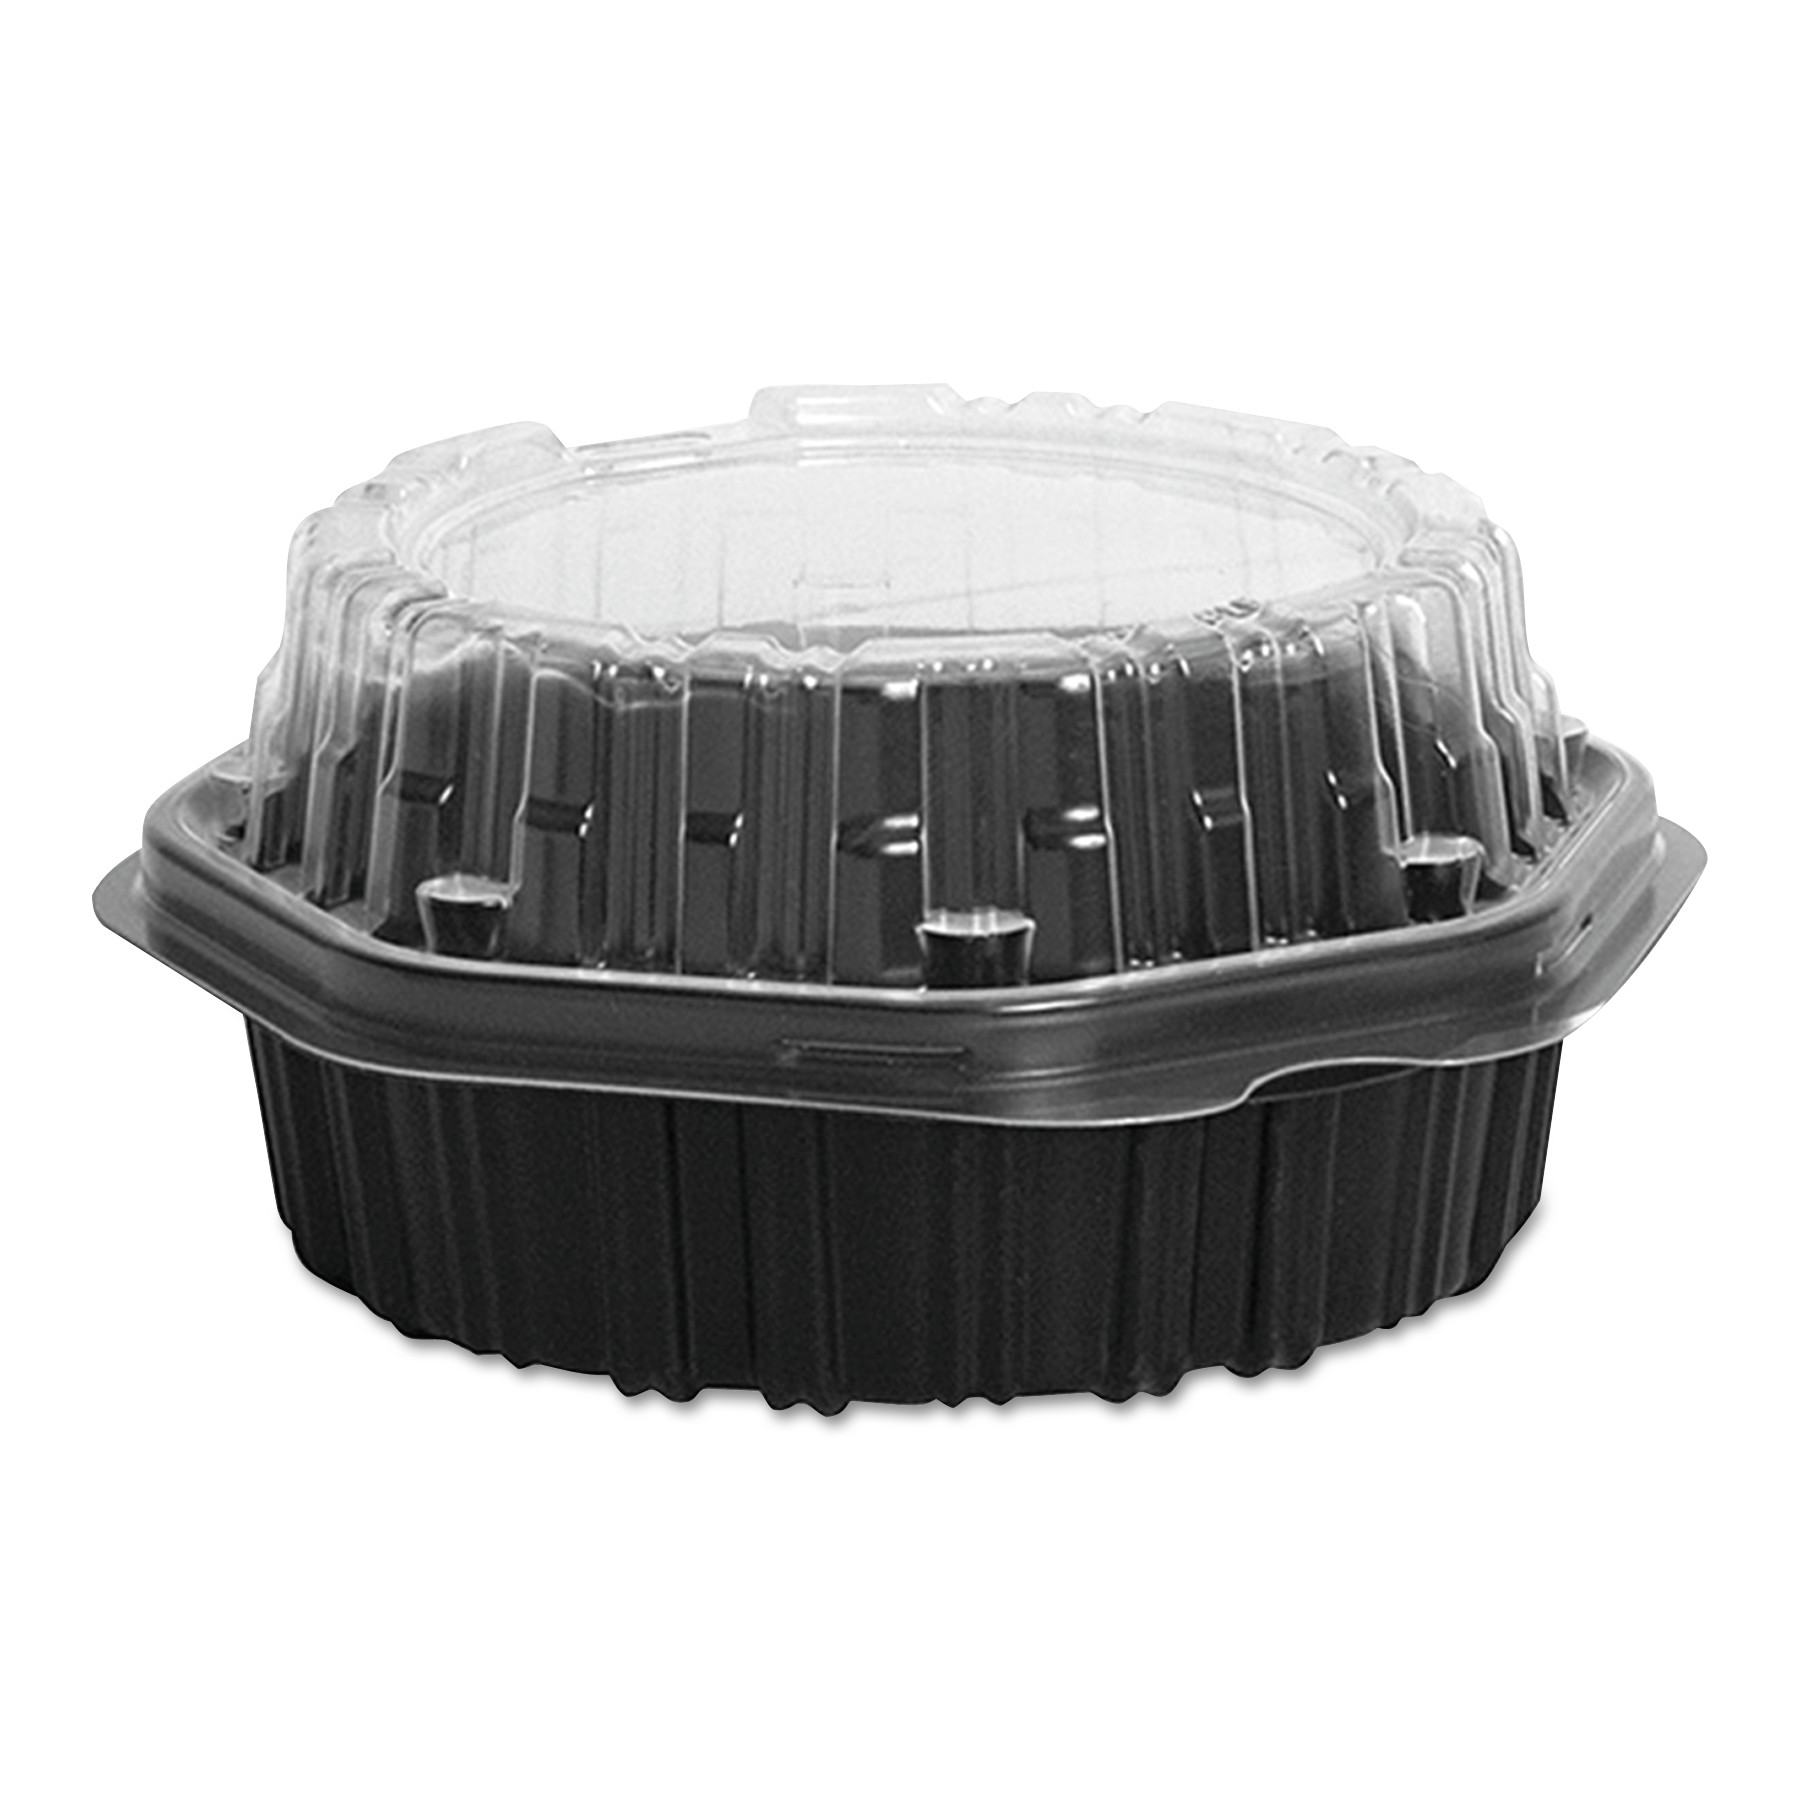  Dart 806016-PP94 Creative Carryouts Hinged Plastic Hot Deli Boxes, 6.3 x 6.1 x 3.1, 200/CT (SCC806016PP94) 